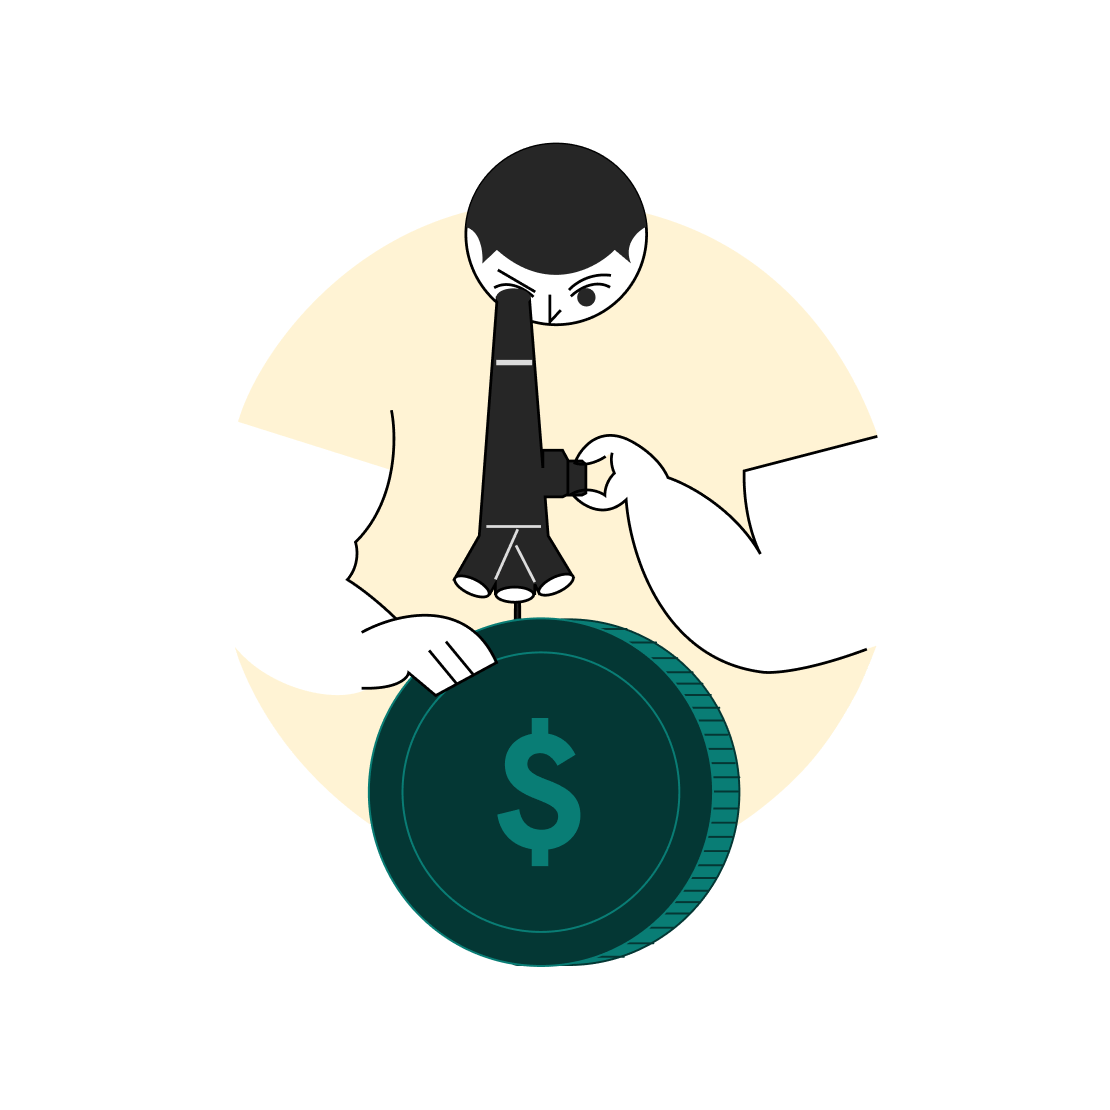 An illustration of a man looking at a coin down a microscope